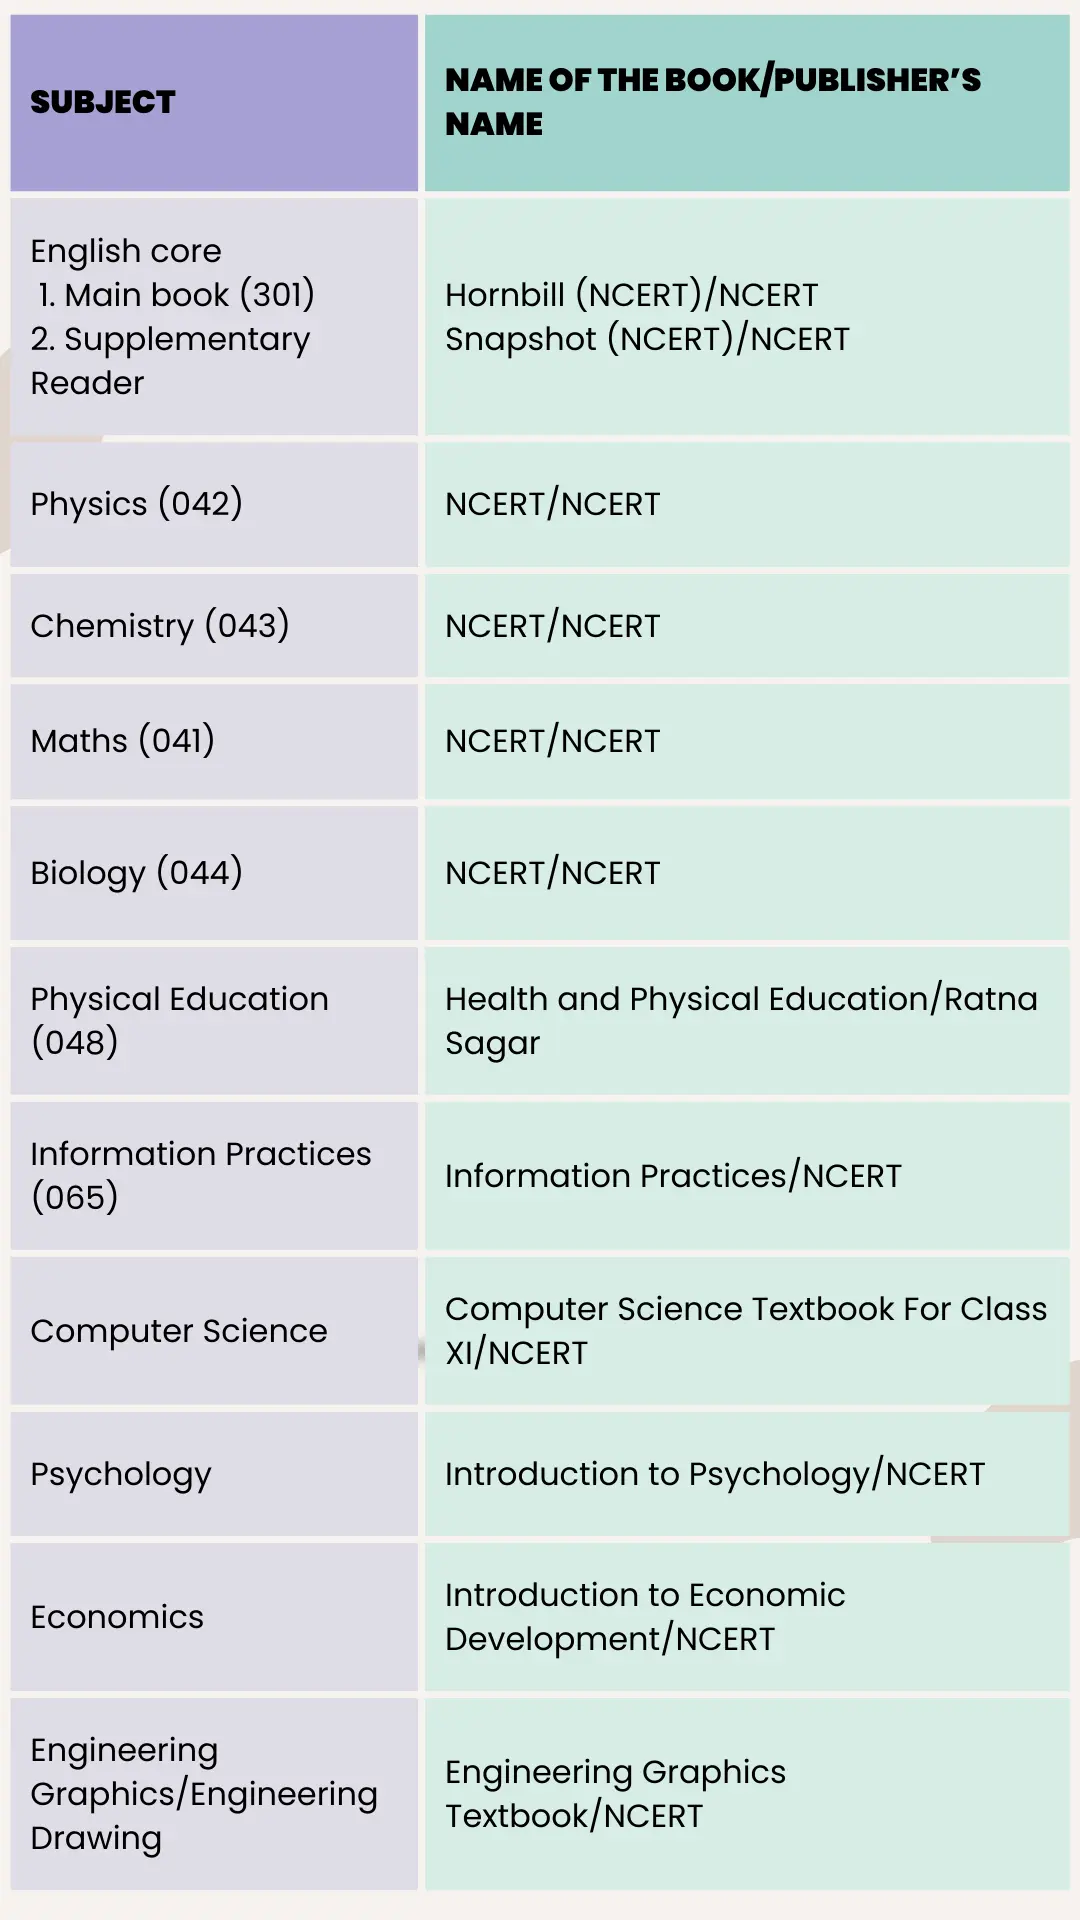 11th-science-subjects-books